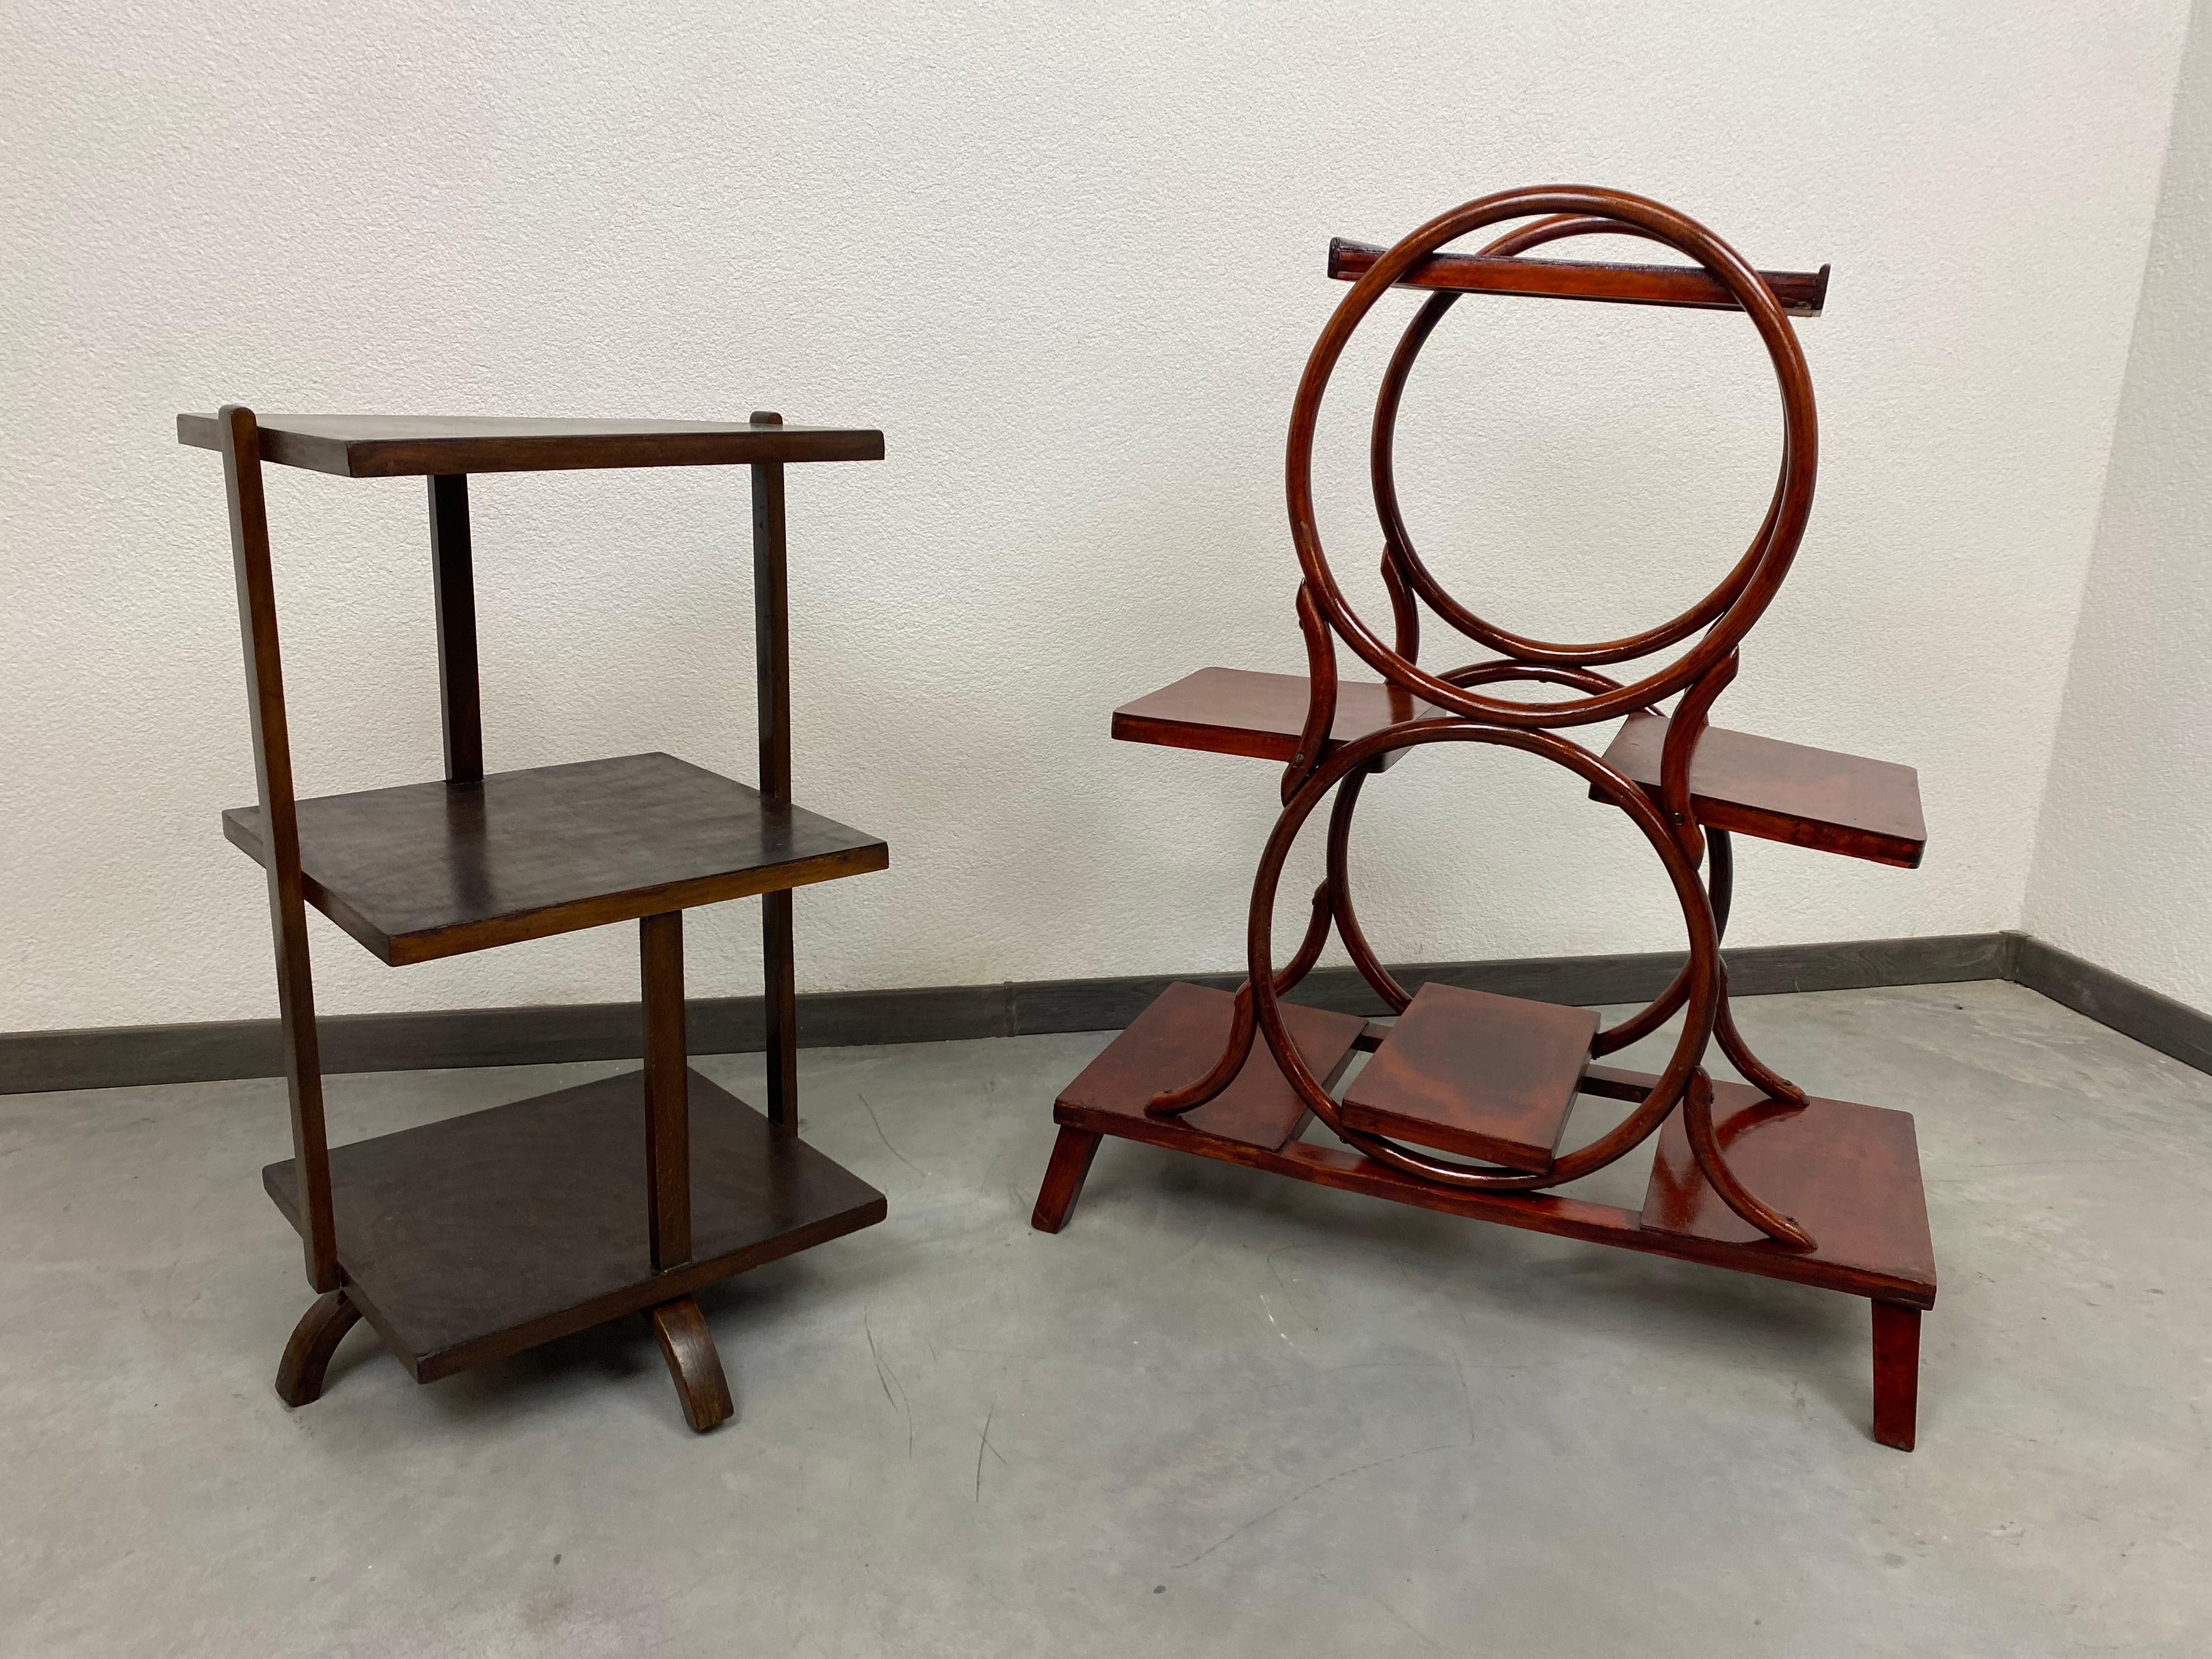 Bentwood plant stand by Thonet professionally stained and repolished.